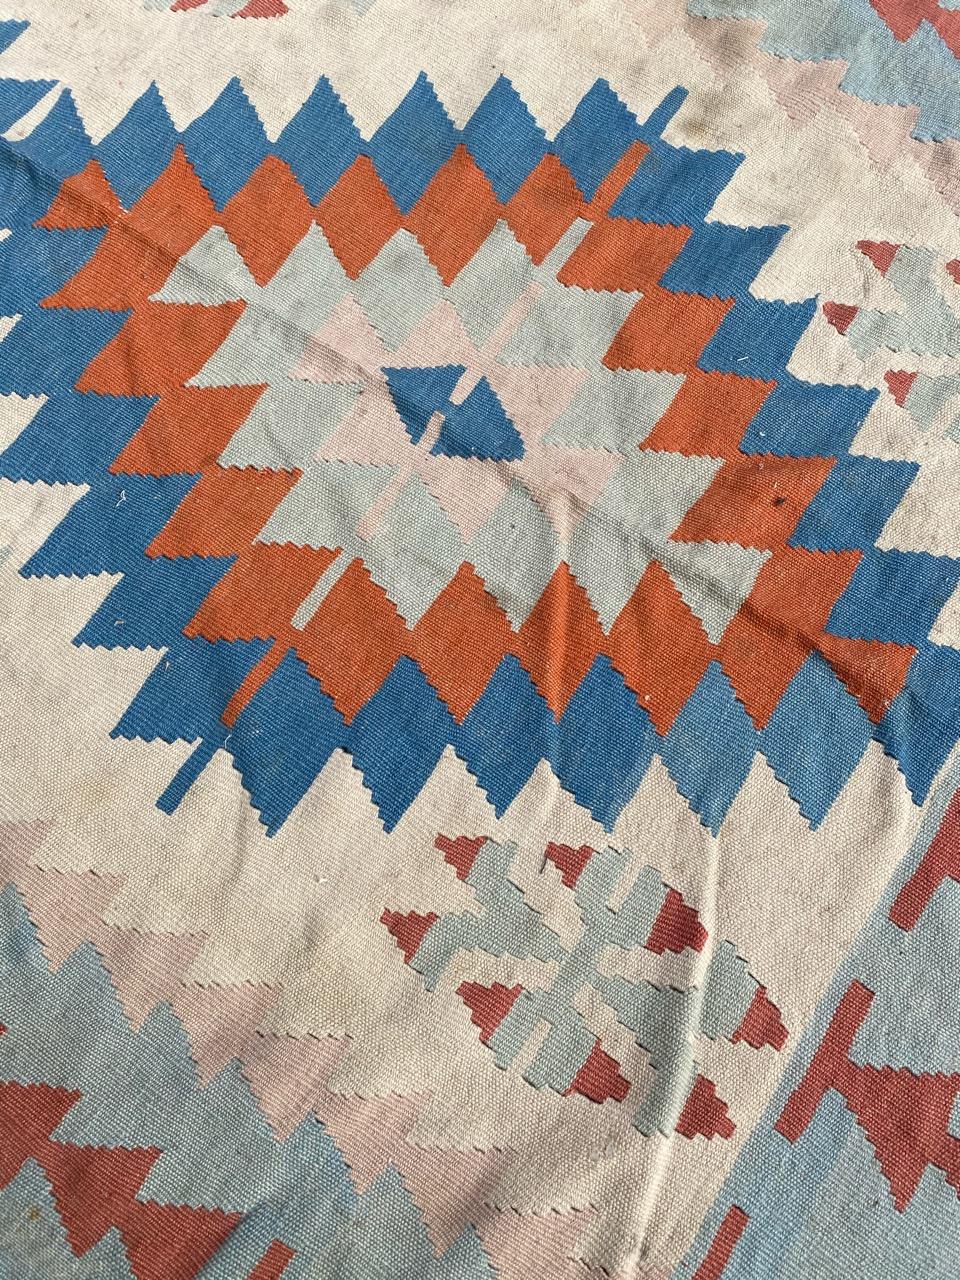 Beautiful Kilim from turkey with geometrical design and light colors, entirely hand woven with wool on wool foundation.